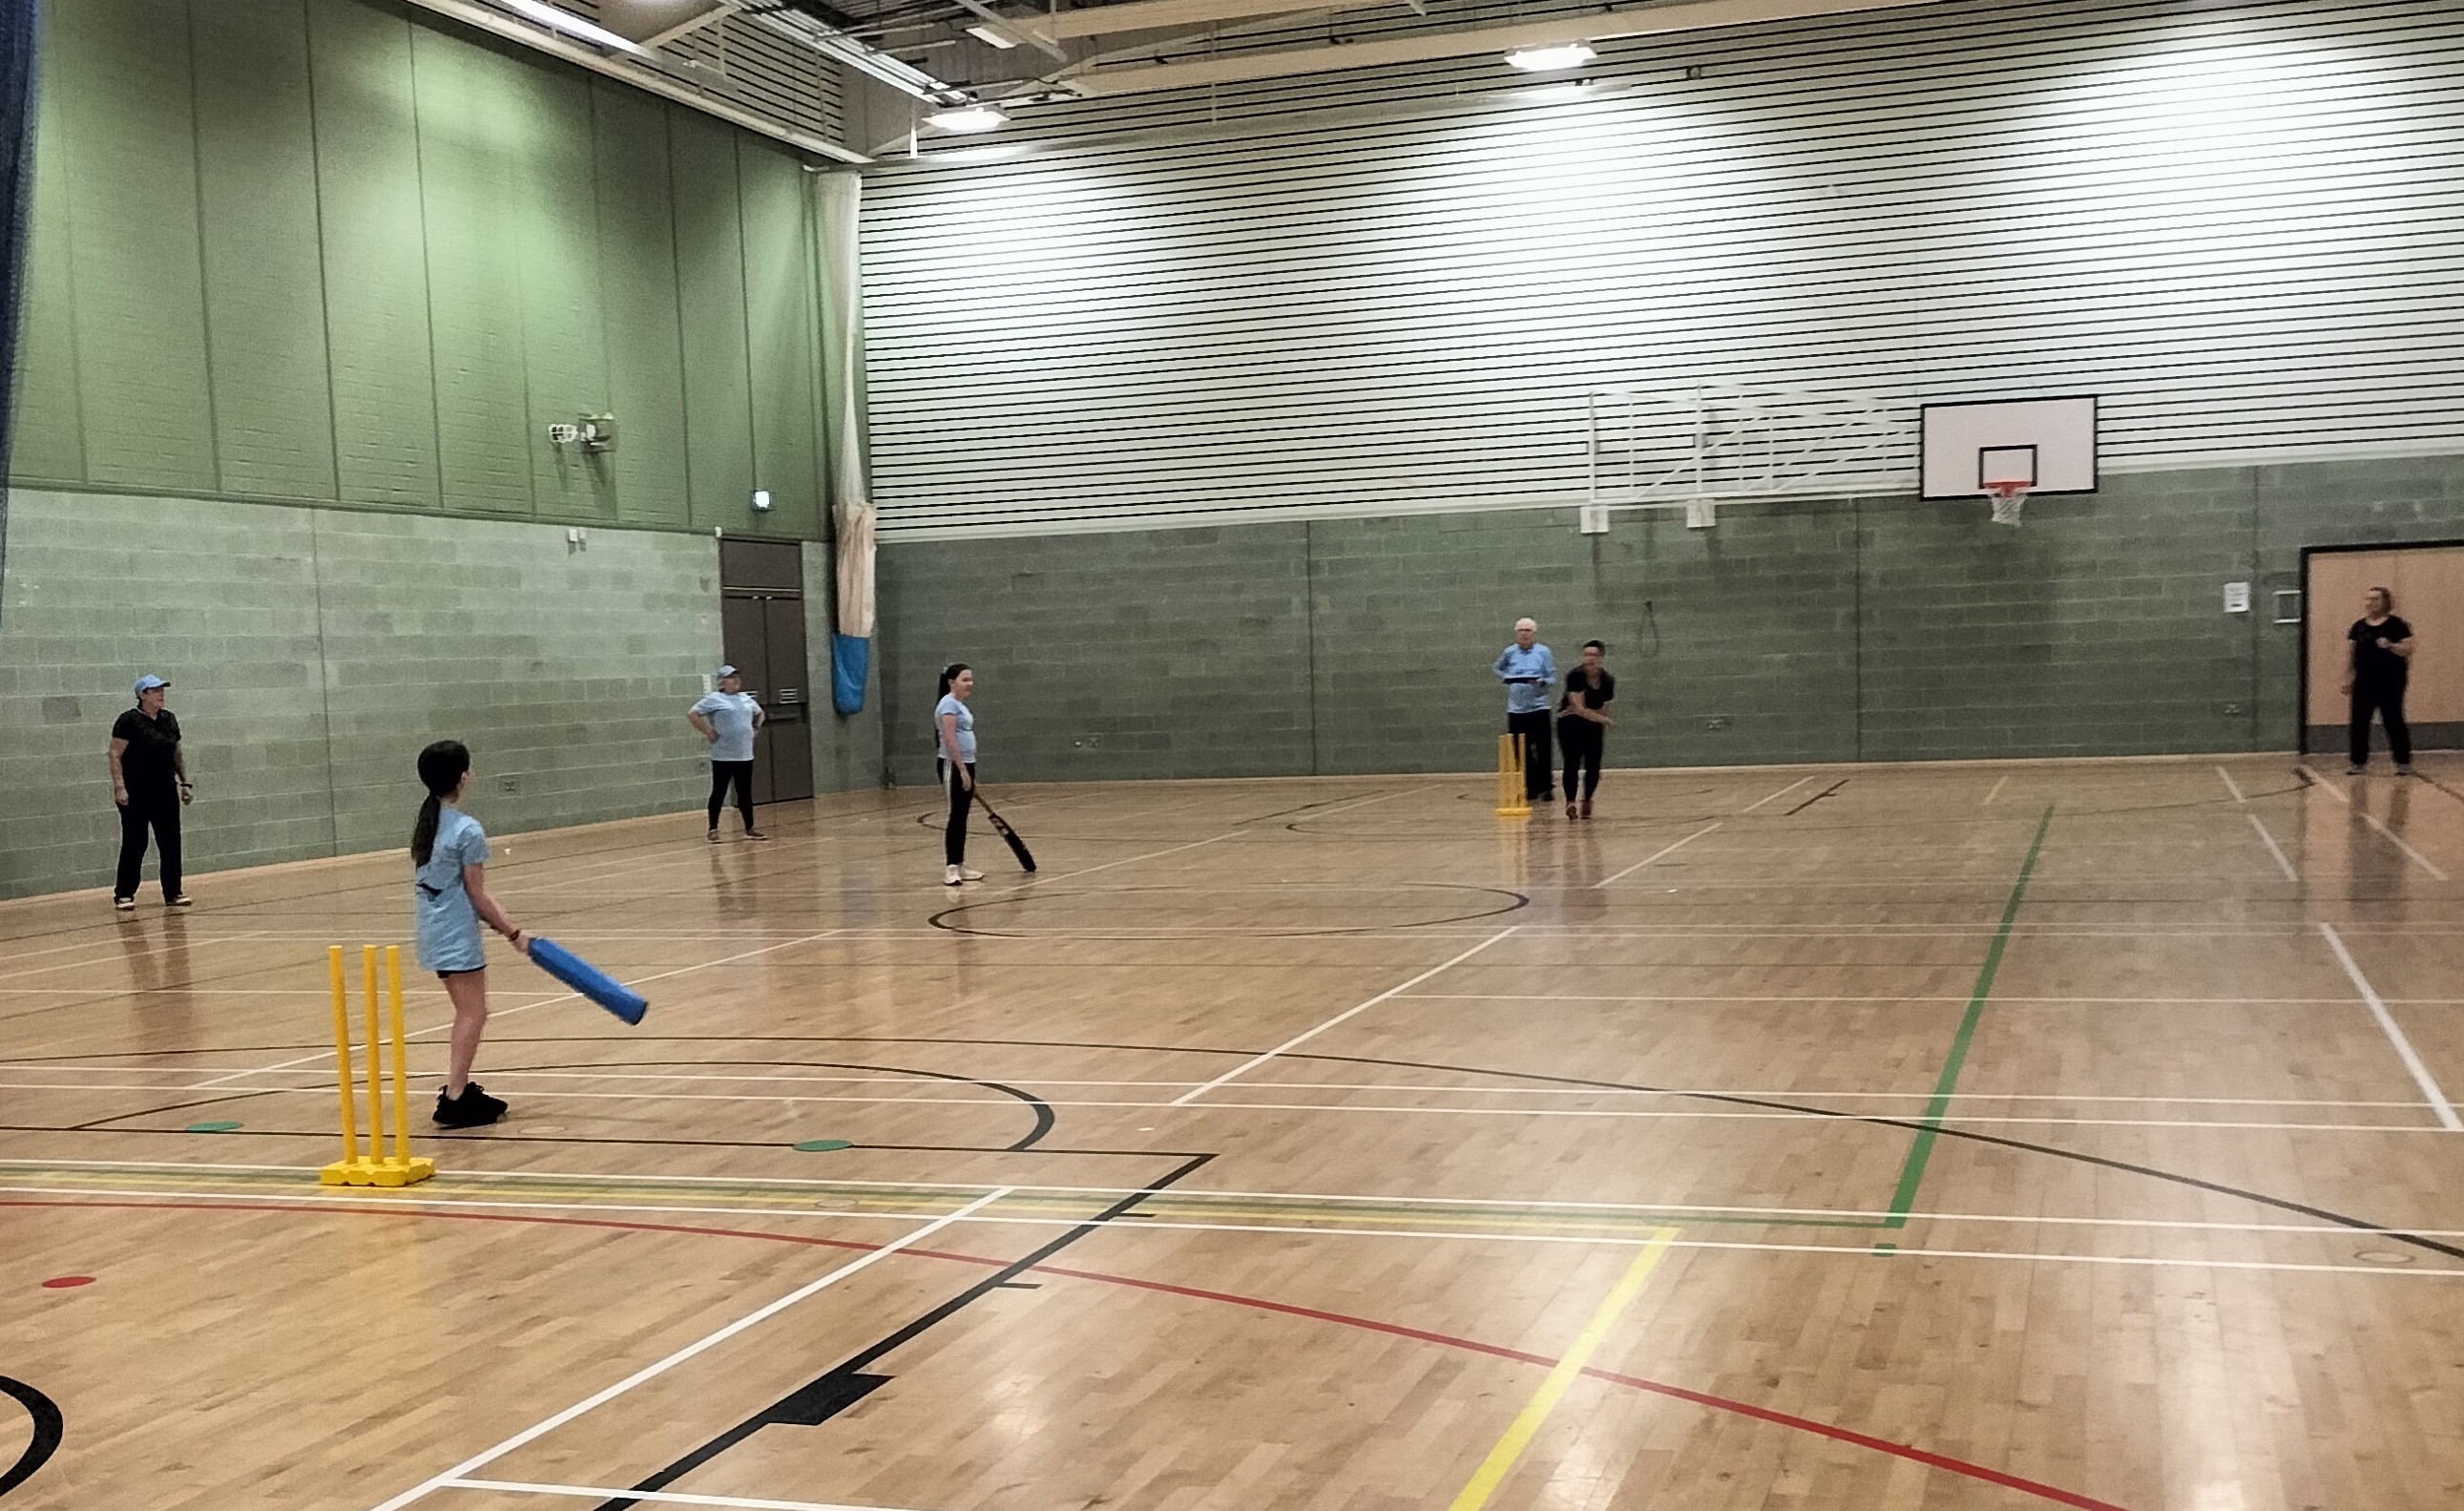 People playing cricket in large hall that has a wooden floor and light green walls, 